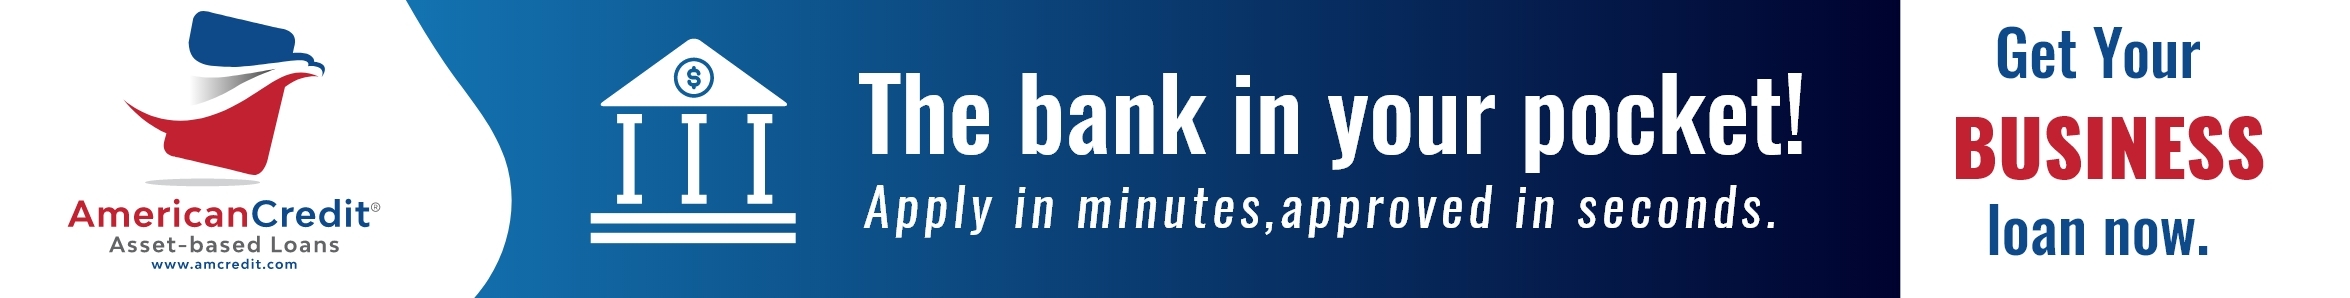 The bank in your pocket | American Credit